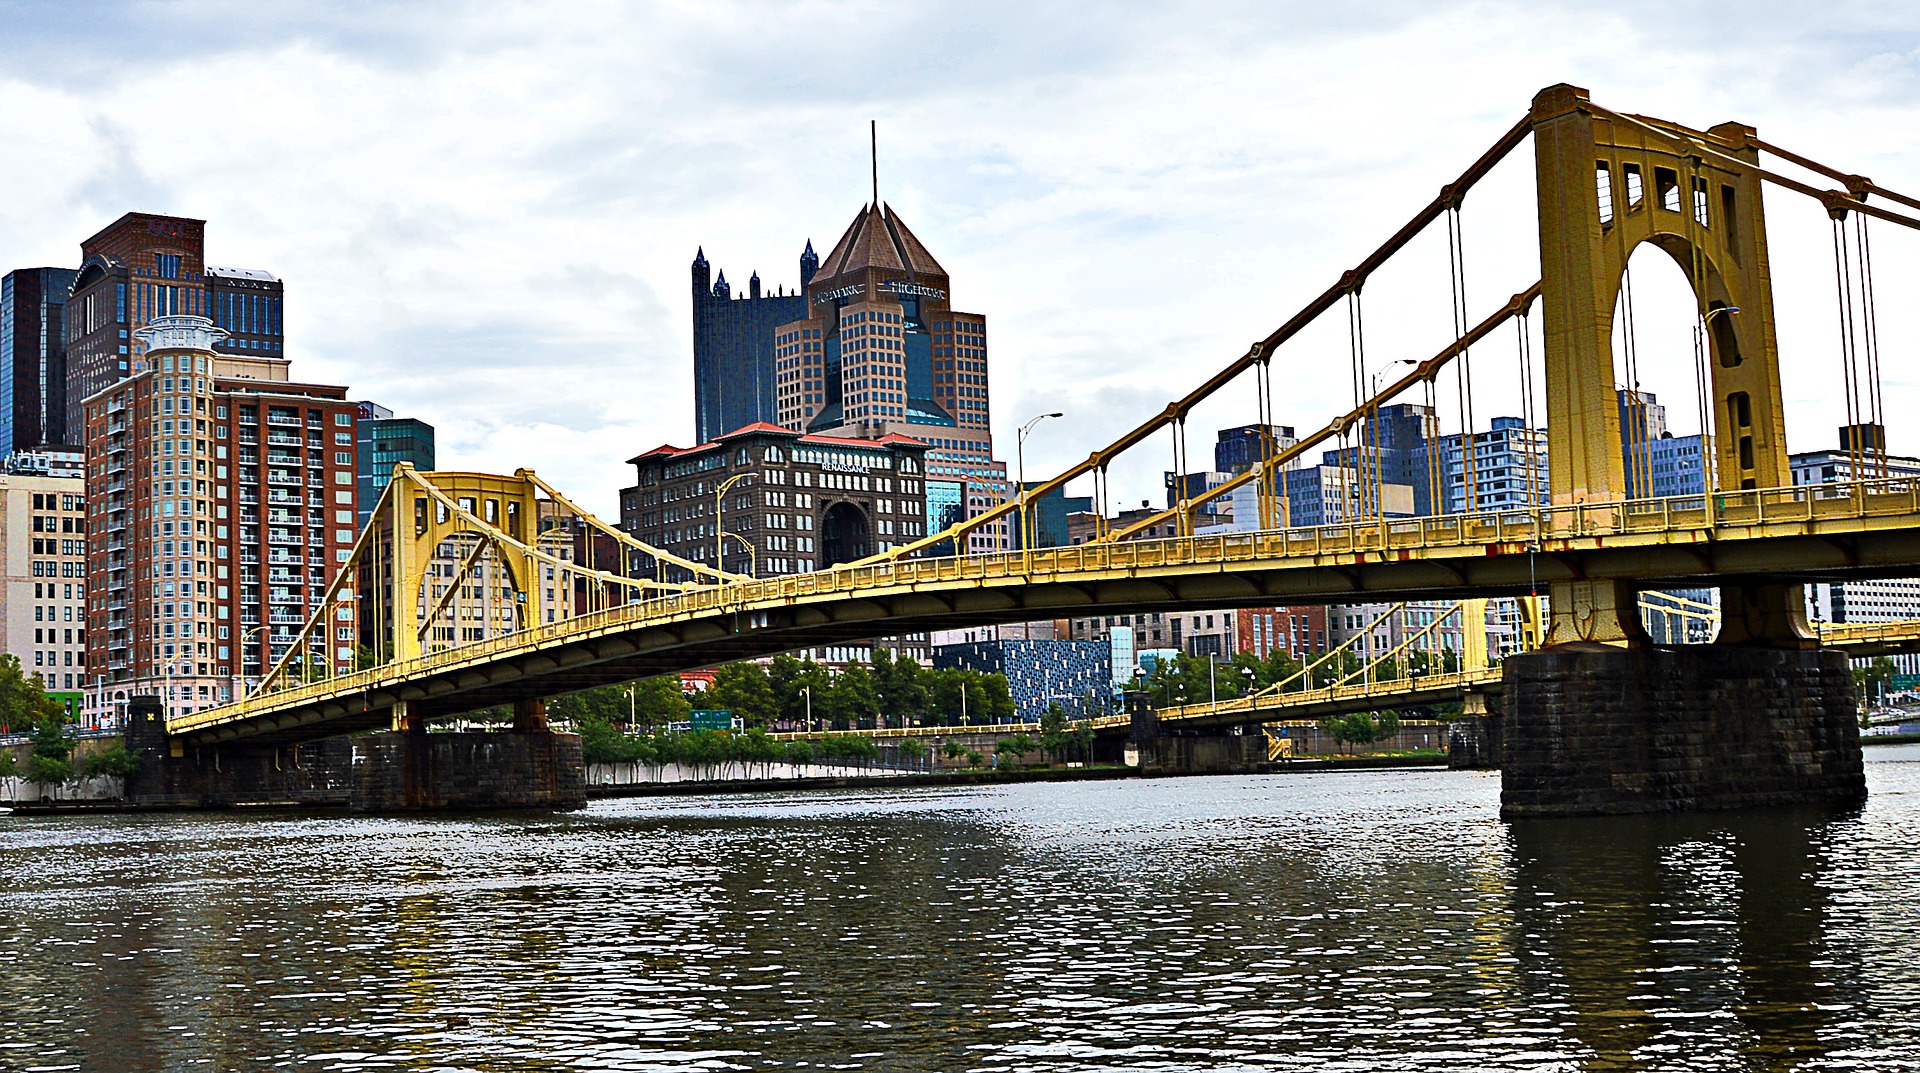 How Pittsburgh Got the Name "The Steel City"